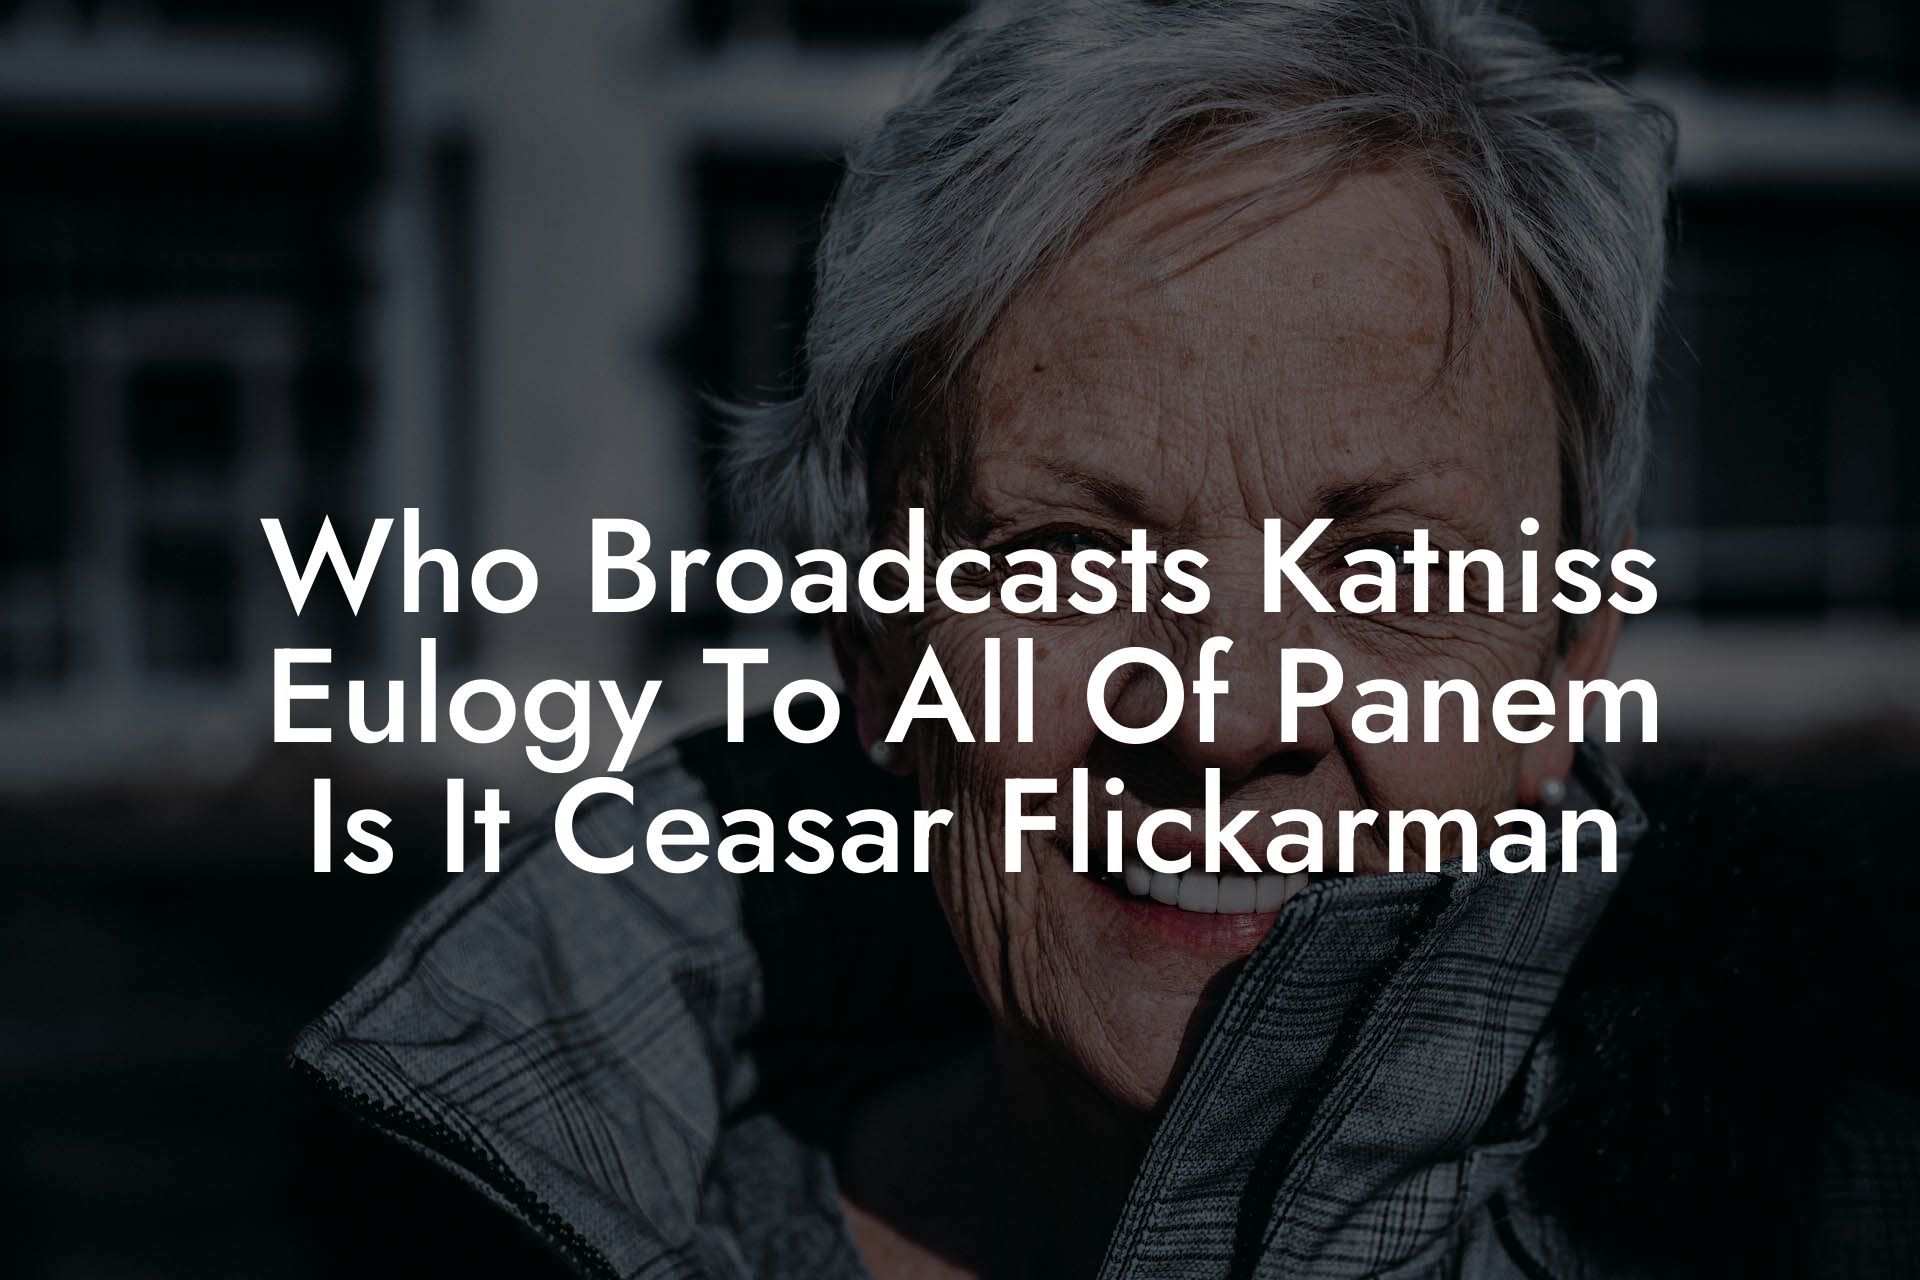 Who Broadcasts Katniss Eulogy To All Of Panem Is It Ceasar Flickarman